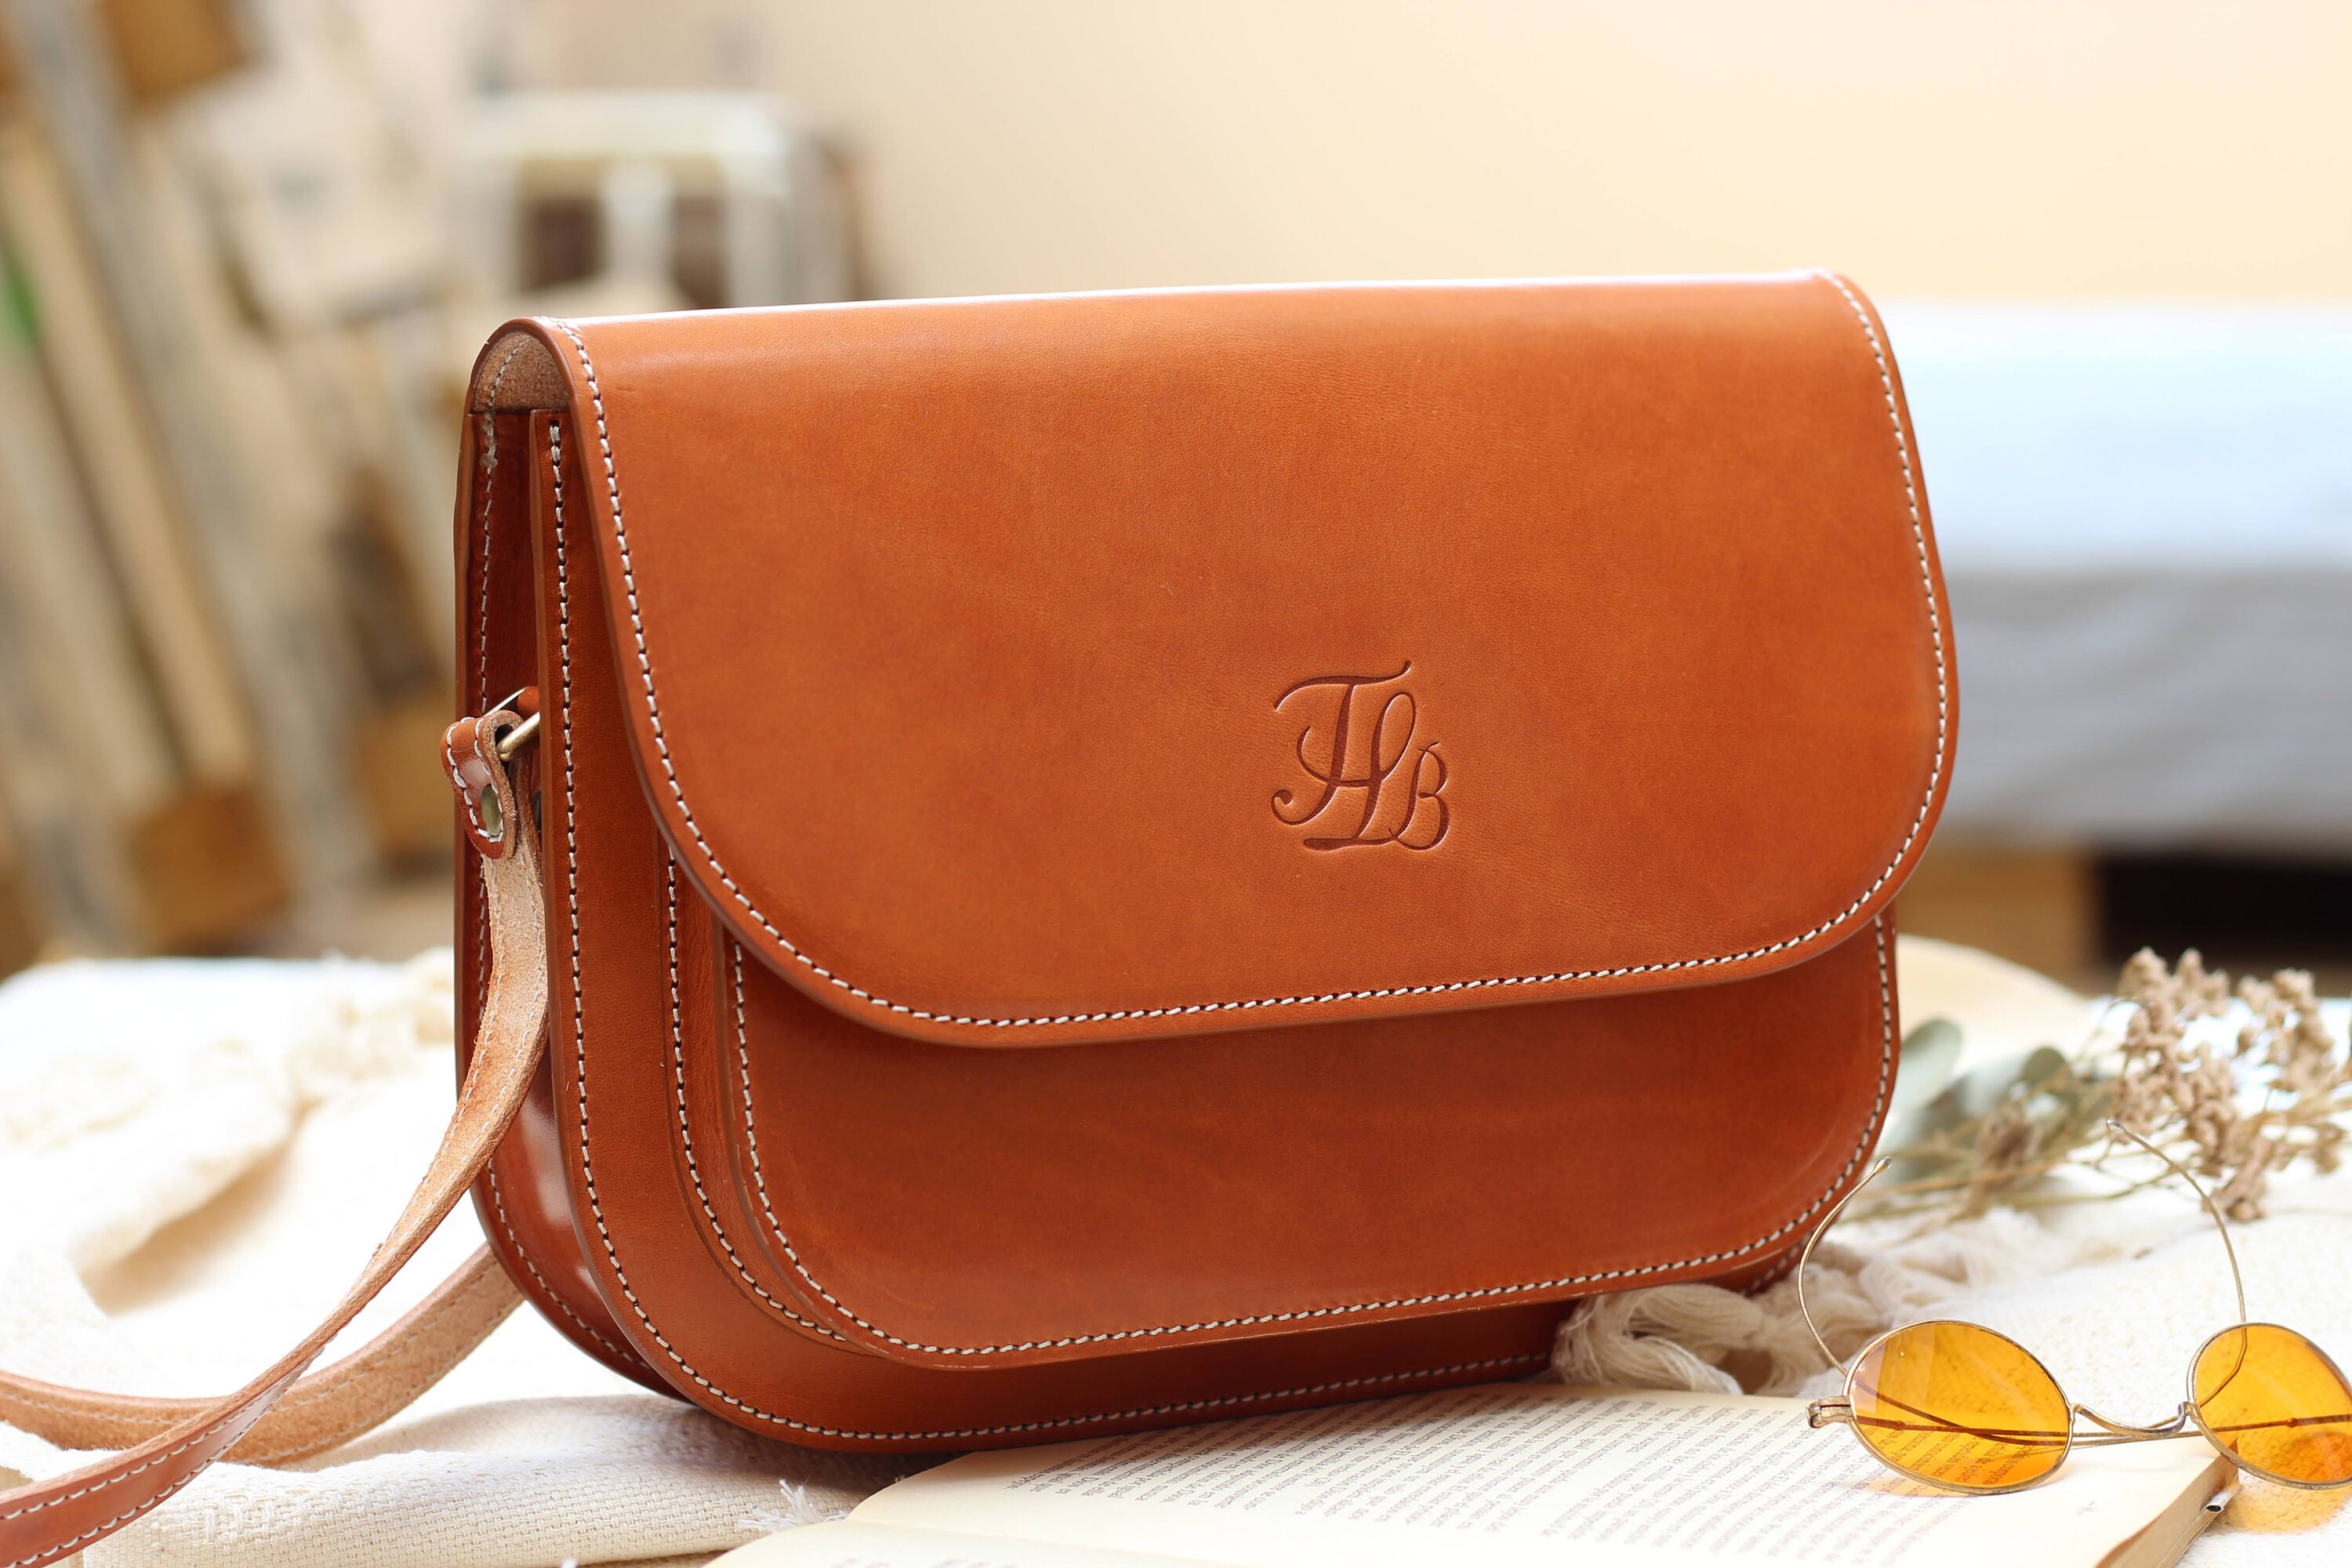 Vlogo Signature Straw Pouch for Woman in Natural/saddle Brown